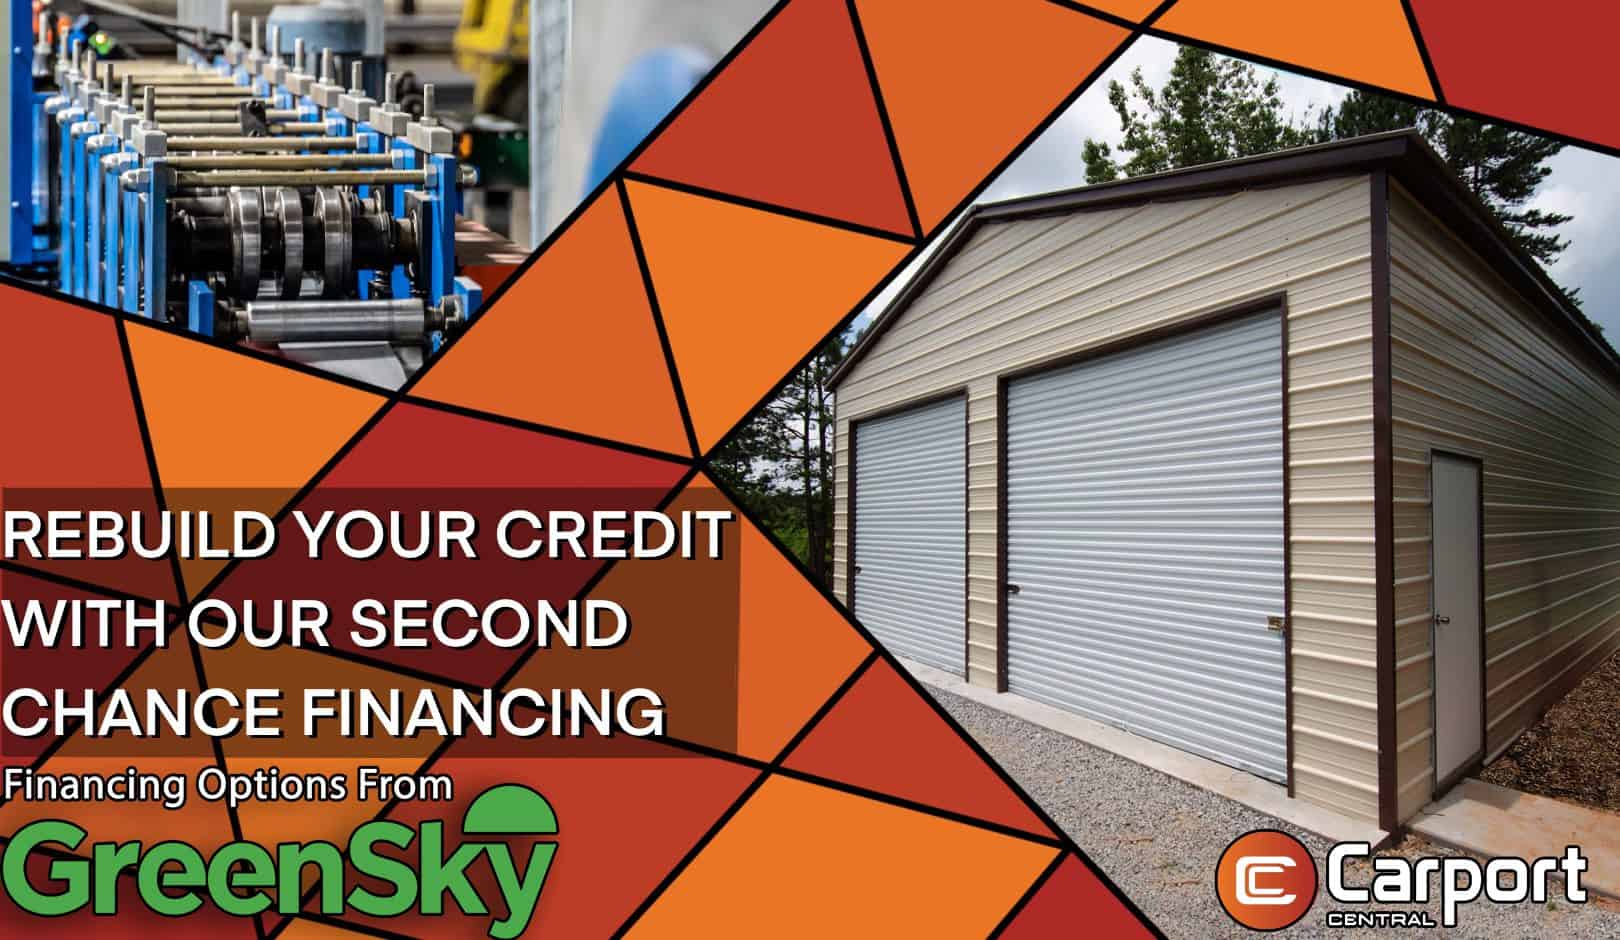 Let Us Rebuild Your Credit With Our 2nd Chance Financing!